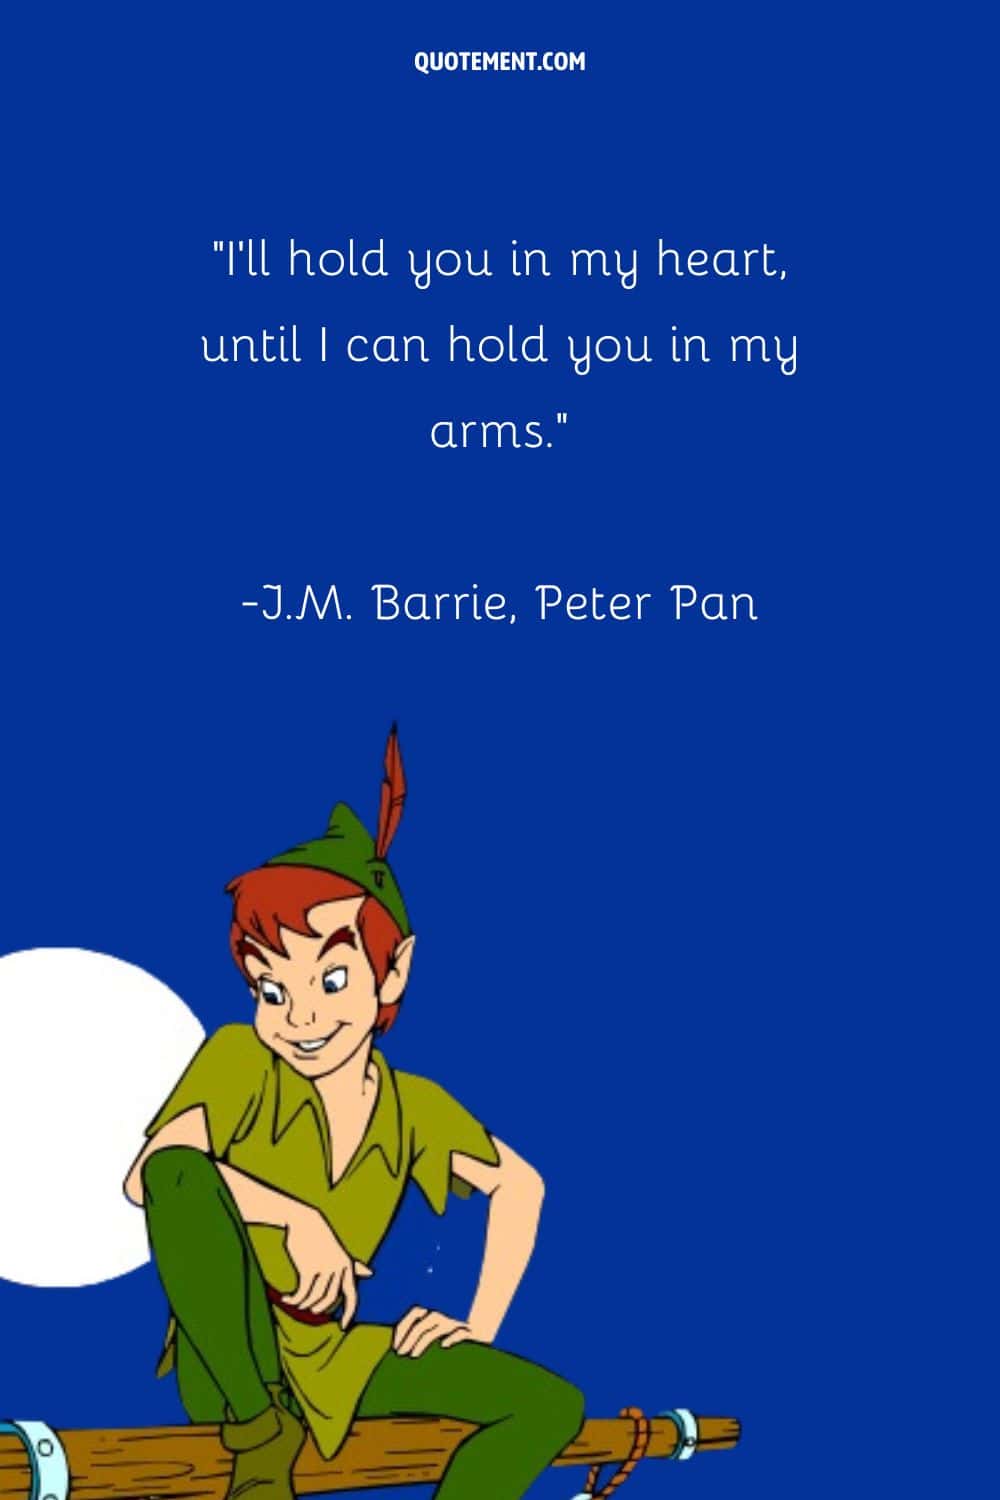 “I'll hold you in my heart, until I can hold you in my arms.” ― JM Barrie, Peter Pan